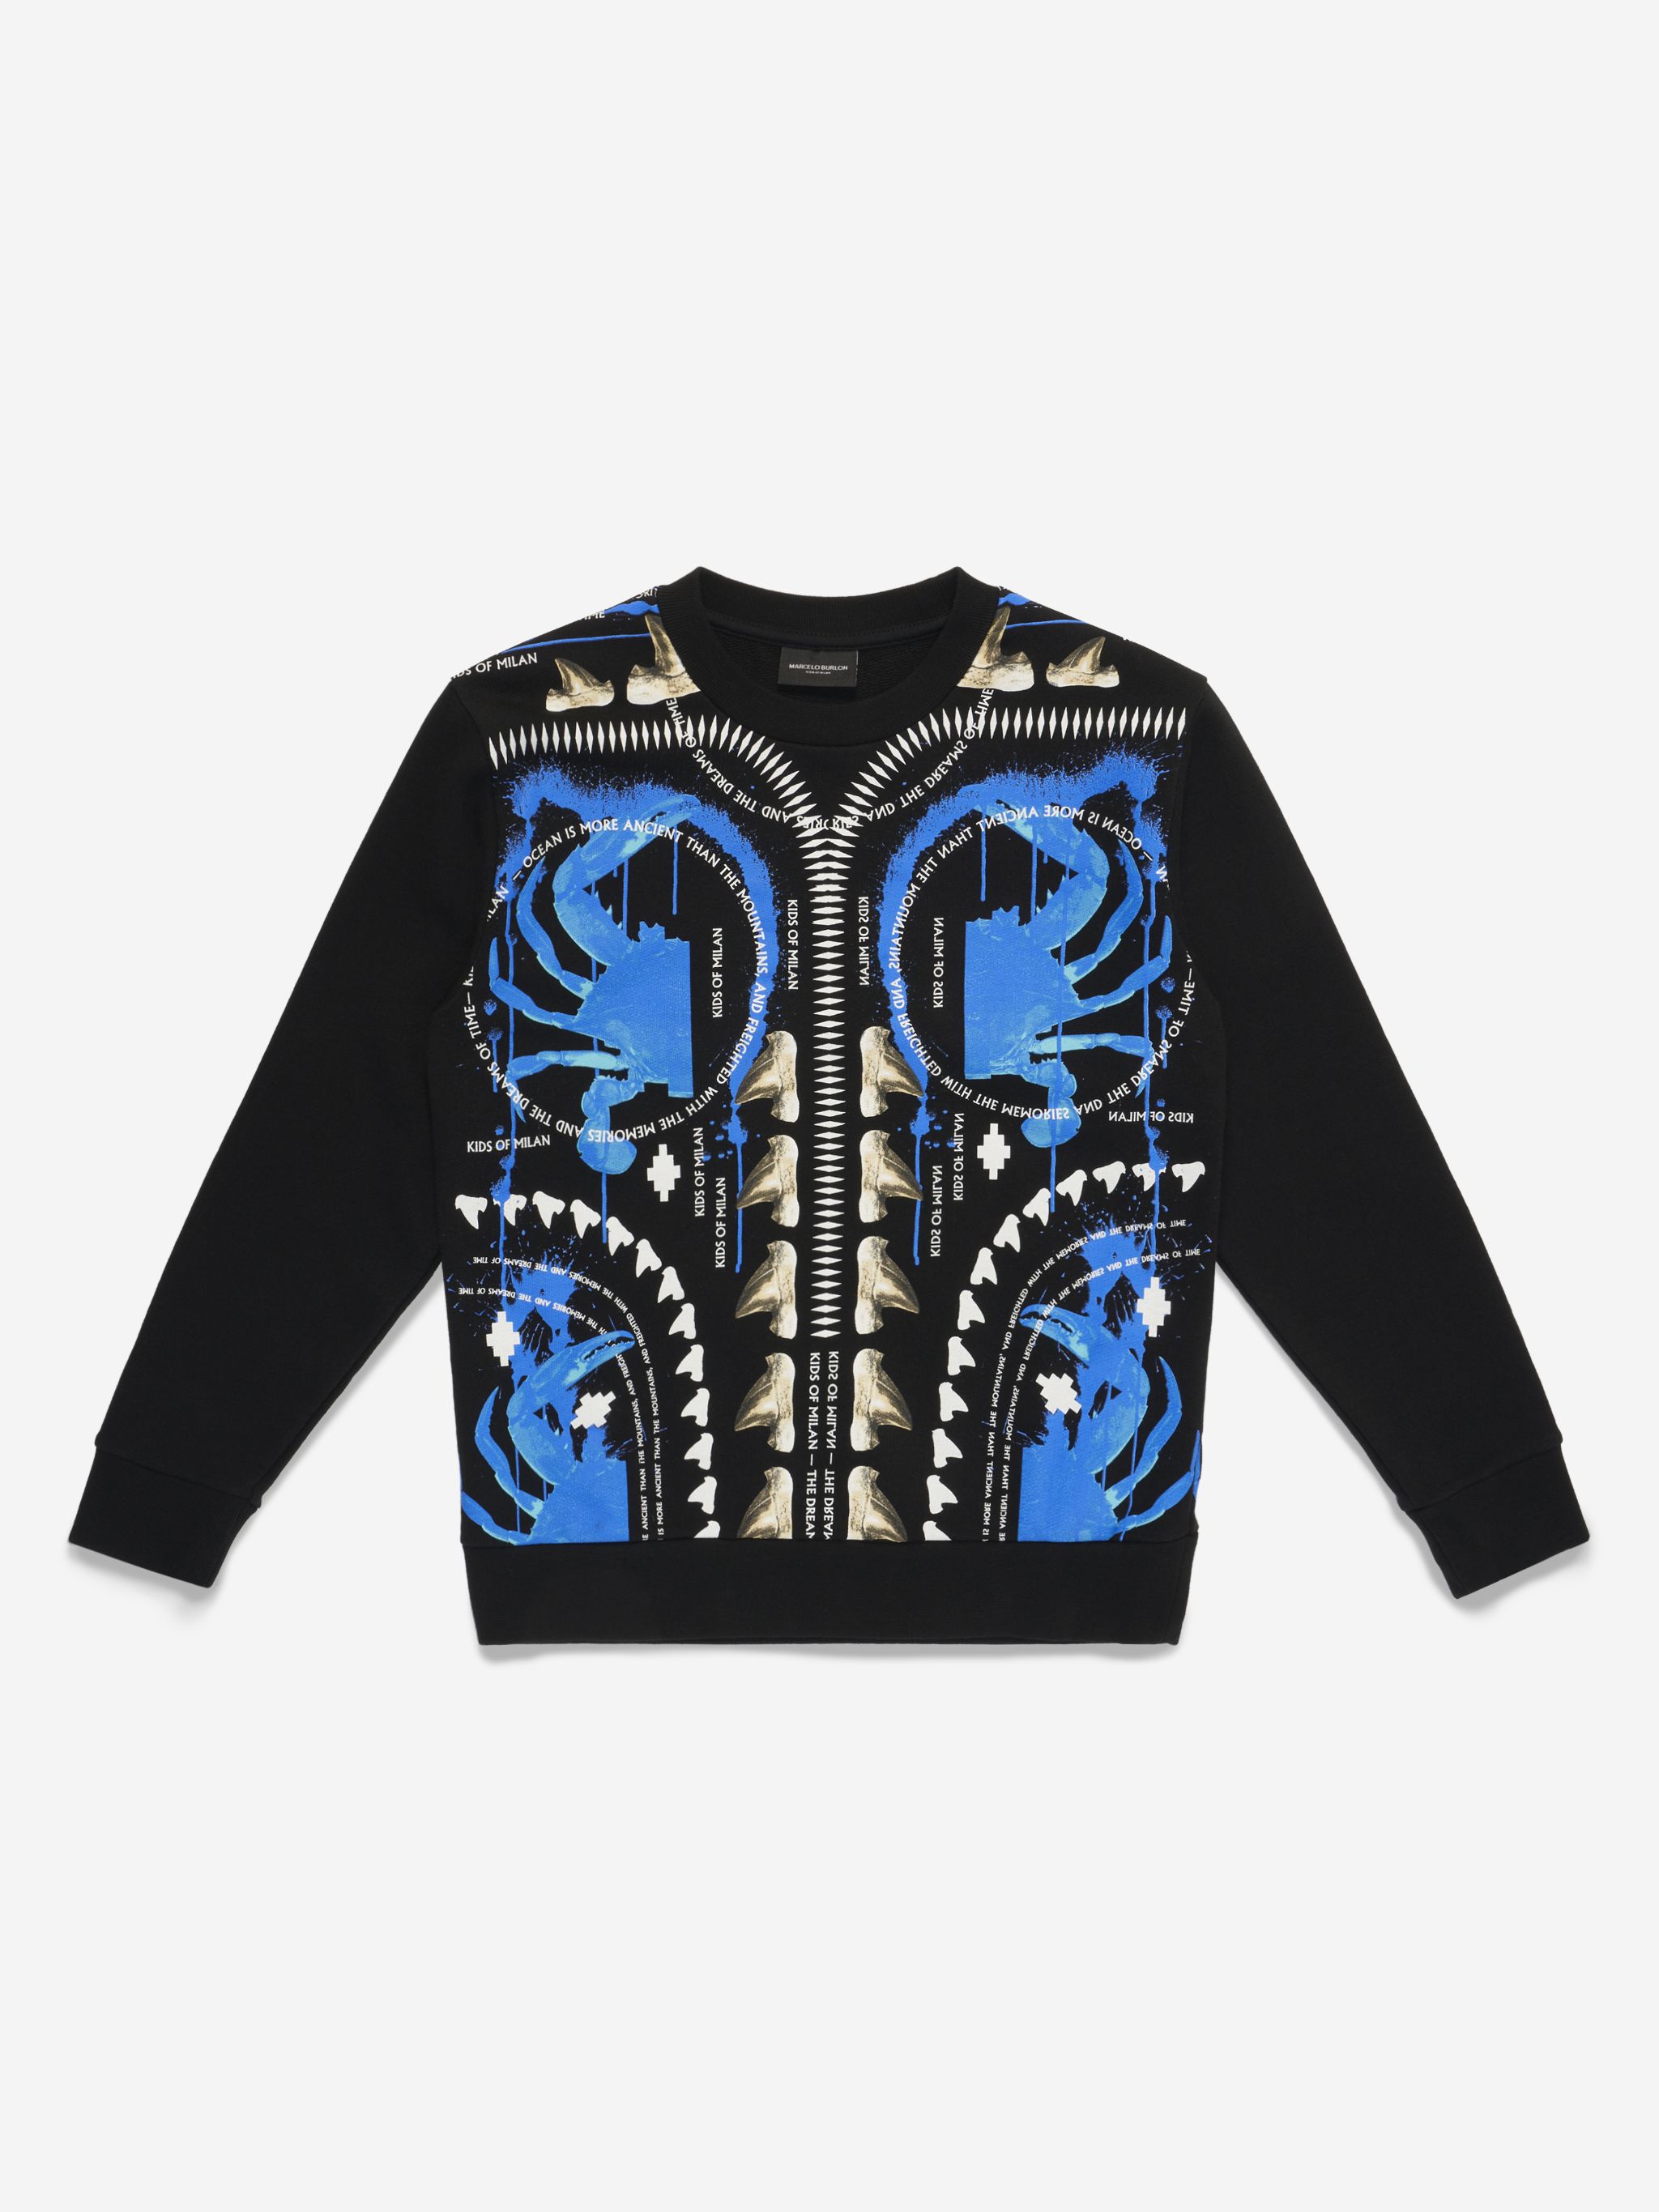 Black/blue/white cotton blend Sprayed crew-neck sweatshirt from Marcelo Burlon Kids featuring crew neck, long sleeves, ribbed hem, ribbed cuffs and signature spray print.